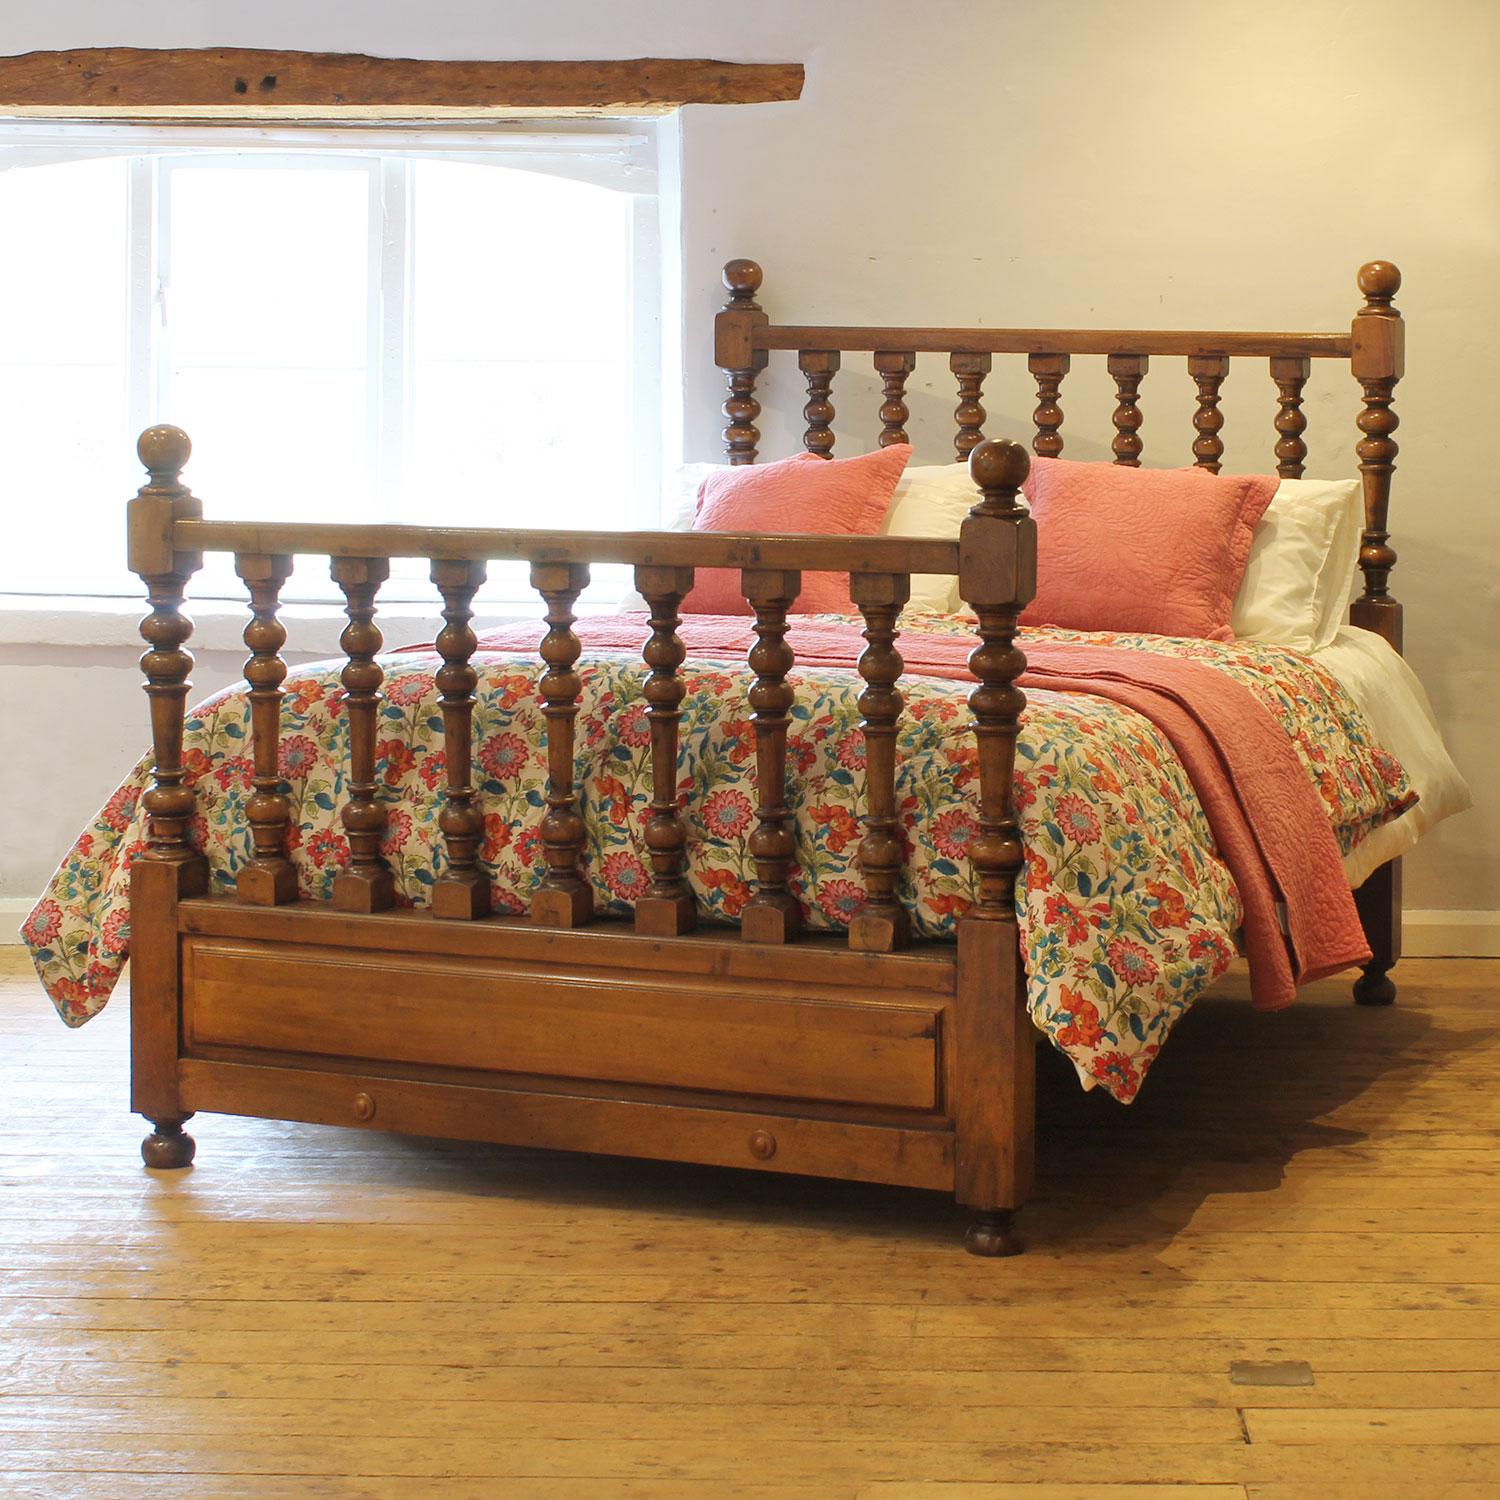 A simple spindle wooden bed in walnut from the mid-Twentieth Century.

This bed accepts a US Queen Size (or UK King Size), 5ft wide (60 in), base and mattress set.

The price includes a firm bed base for the bed frame.

The mattress, bedding and